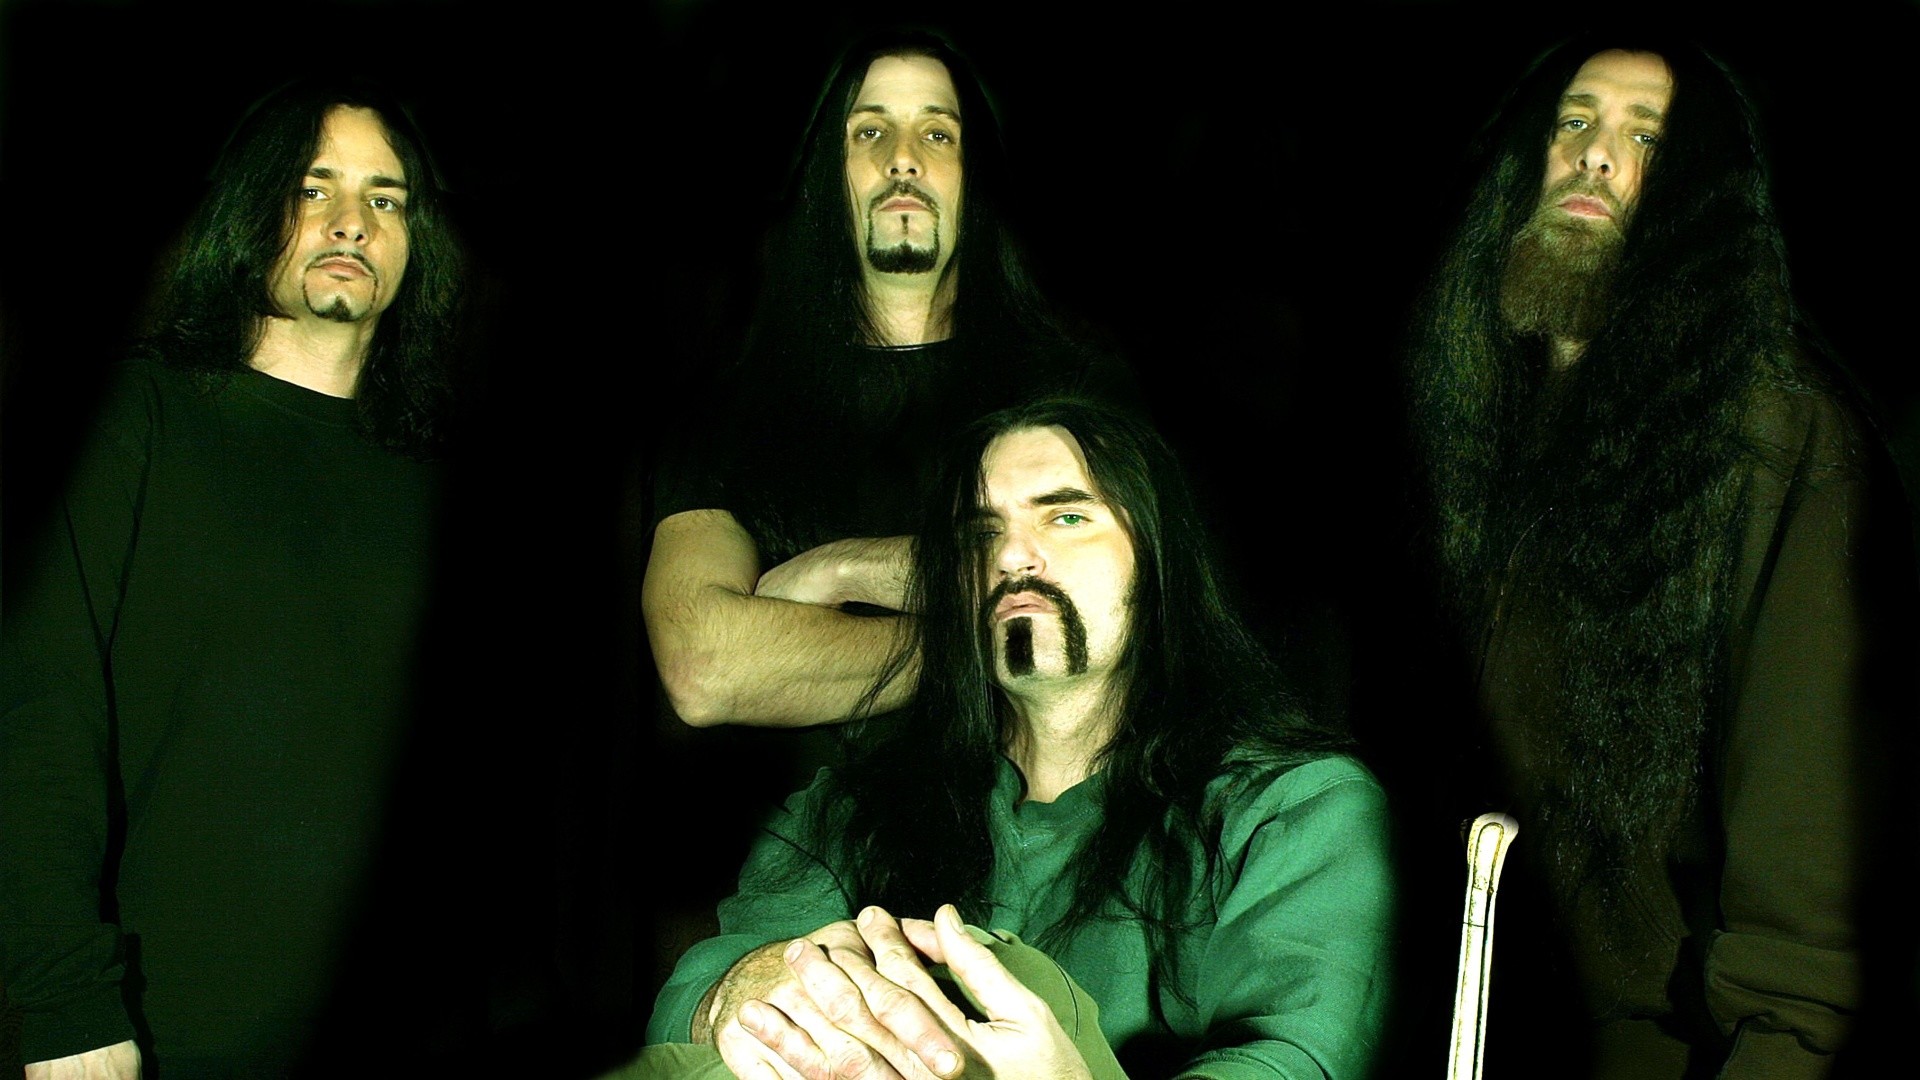 1920x1080 Background. Please login to make requests. Please login to upload images. Type  O Negative backdrop wallpaper